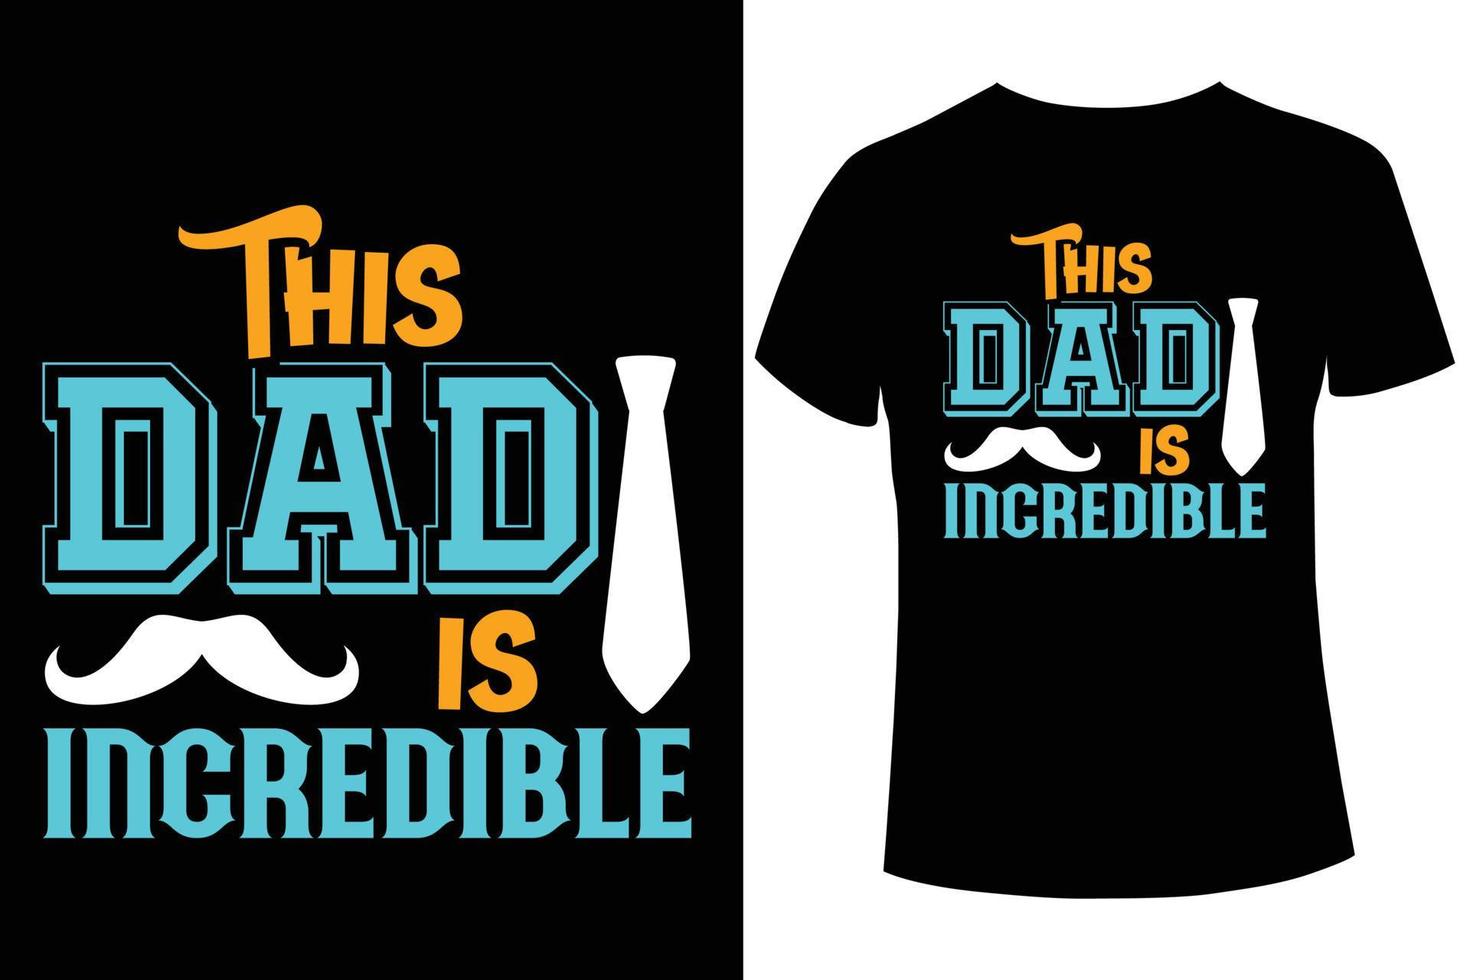 This dad is incredible t-shirt design template vector